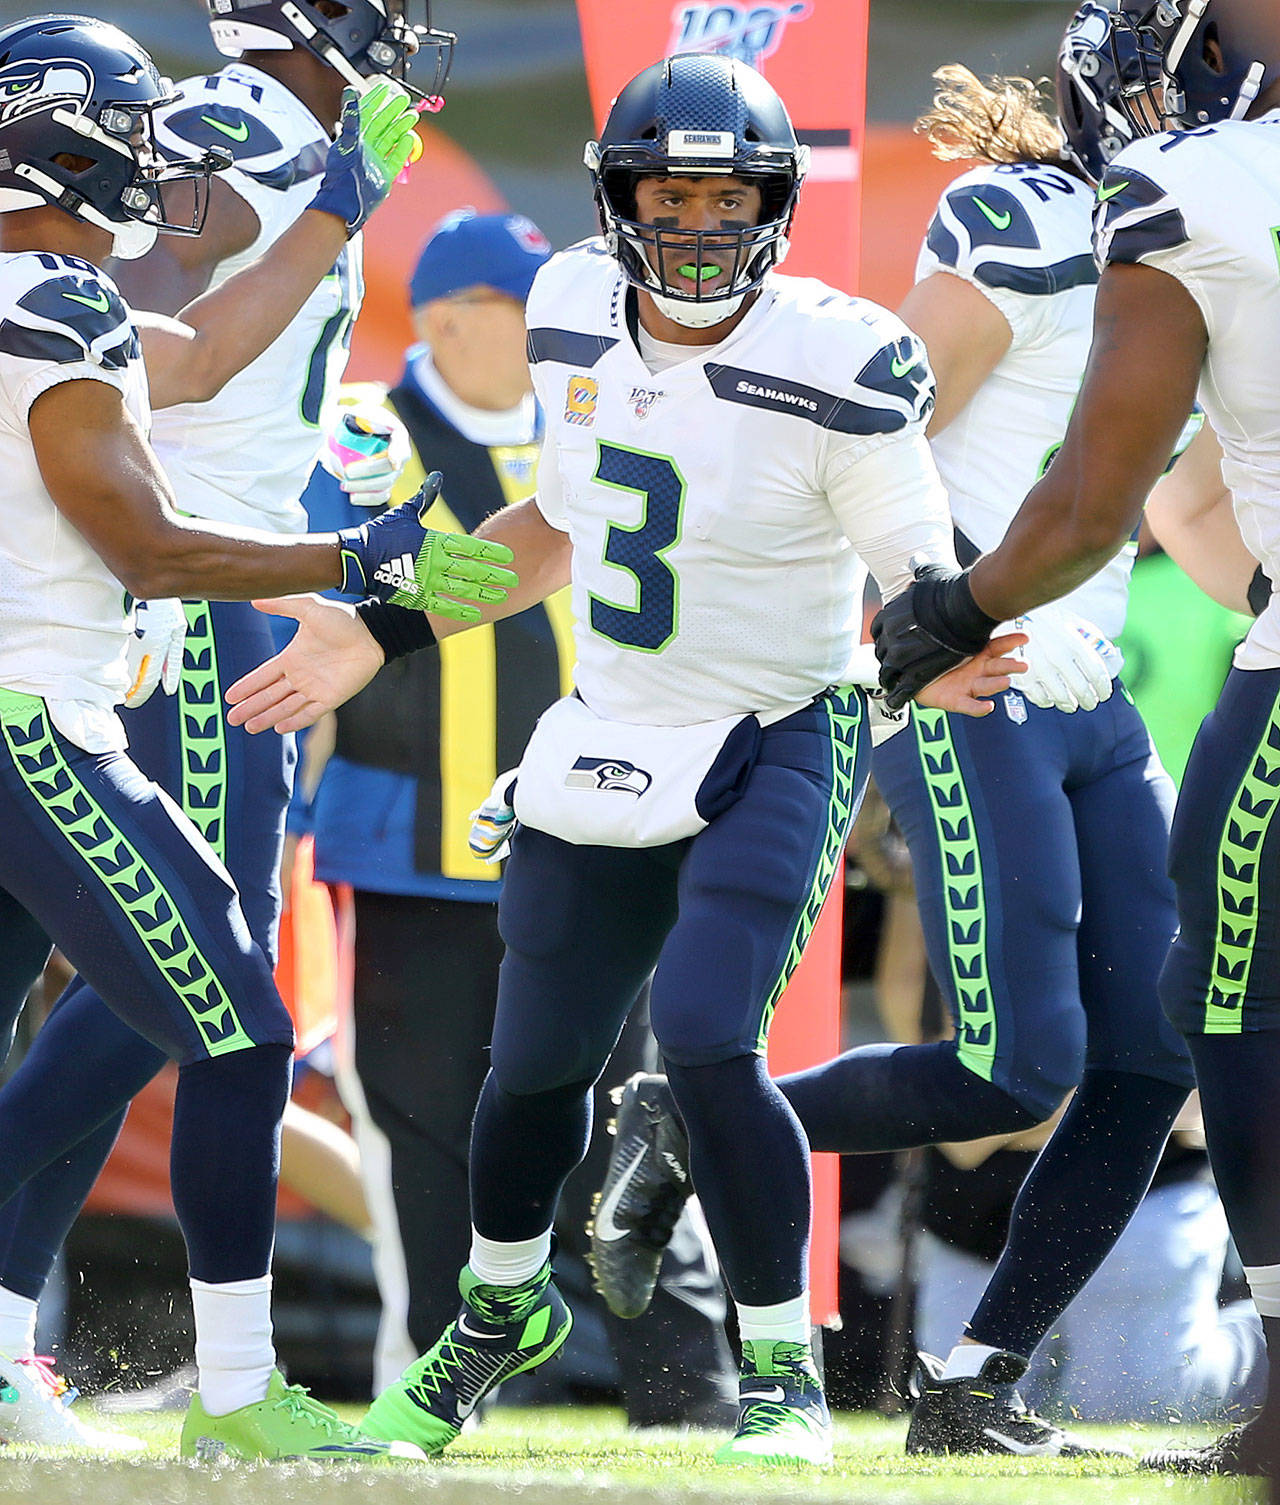 Seattle Seahawks quarterback Russell Wilson is congratulated after running in for a touchdown during the first quarter against the Cleveland Browns at FirstEnergy Stadium on Sunday. (Joshua Gunter | cleveland.com)